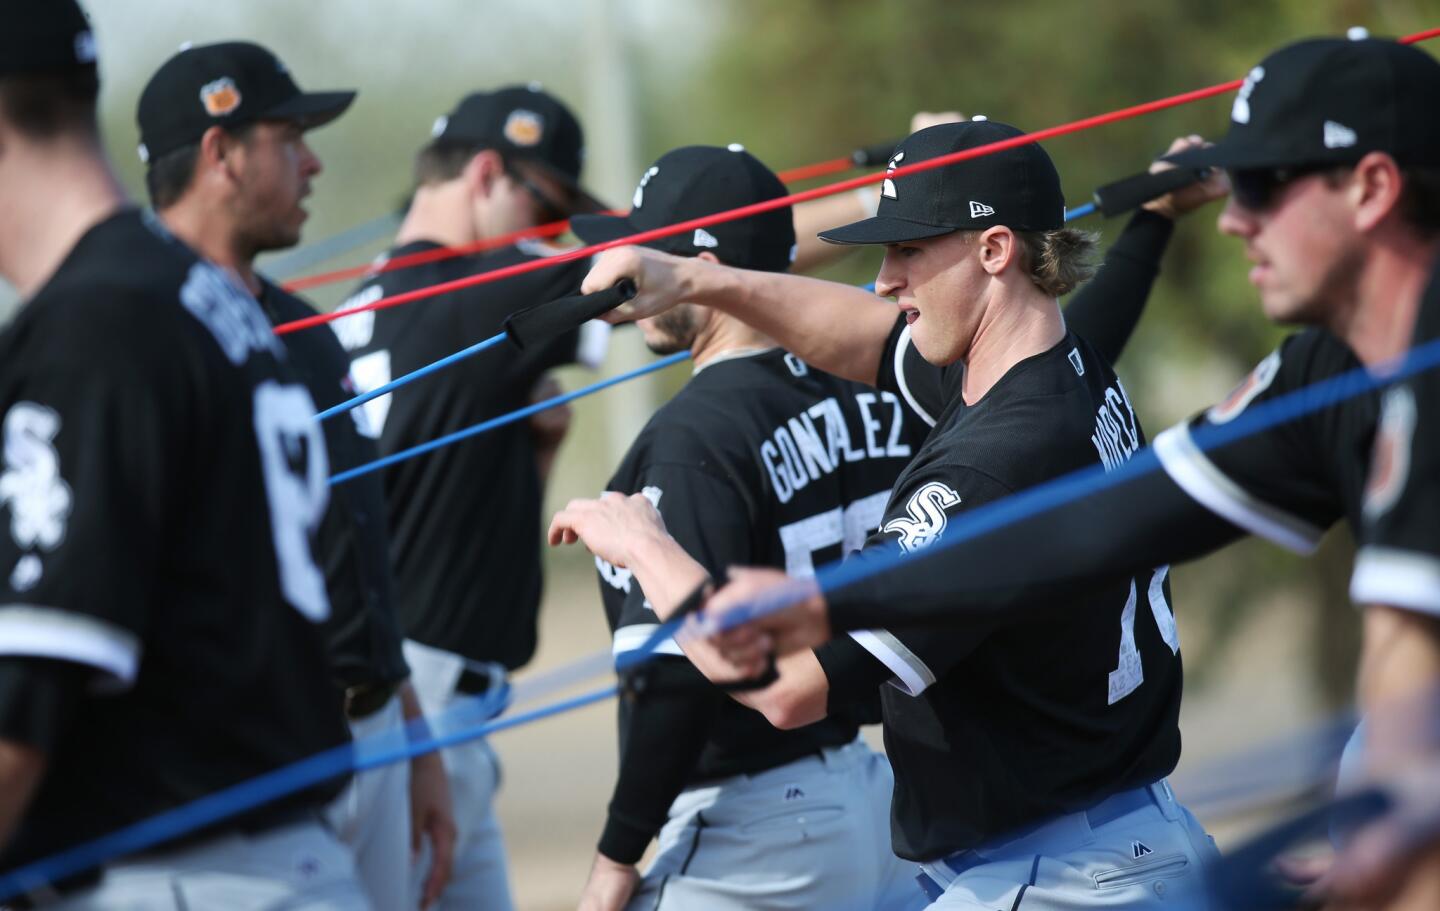 White Sox pitcher Michael Kopech, second from right, warms up during a spring training practice at Camelback Ranch on Feb. 17, 2017.